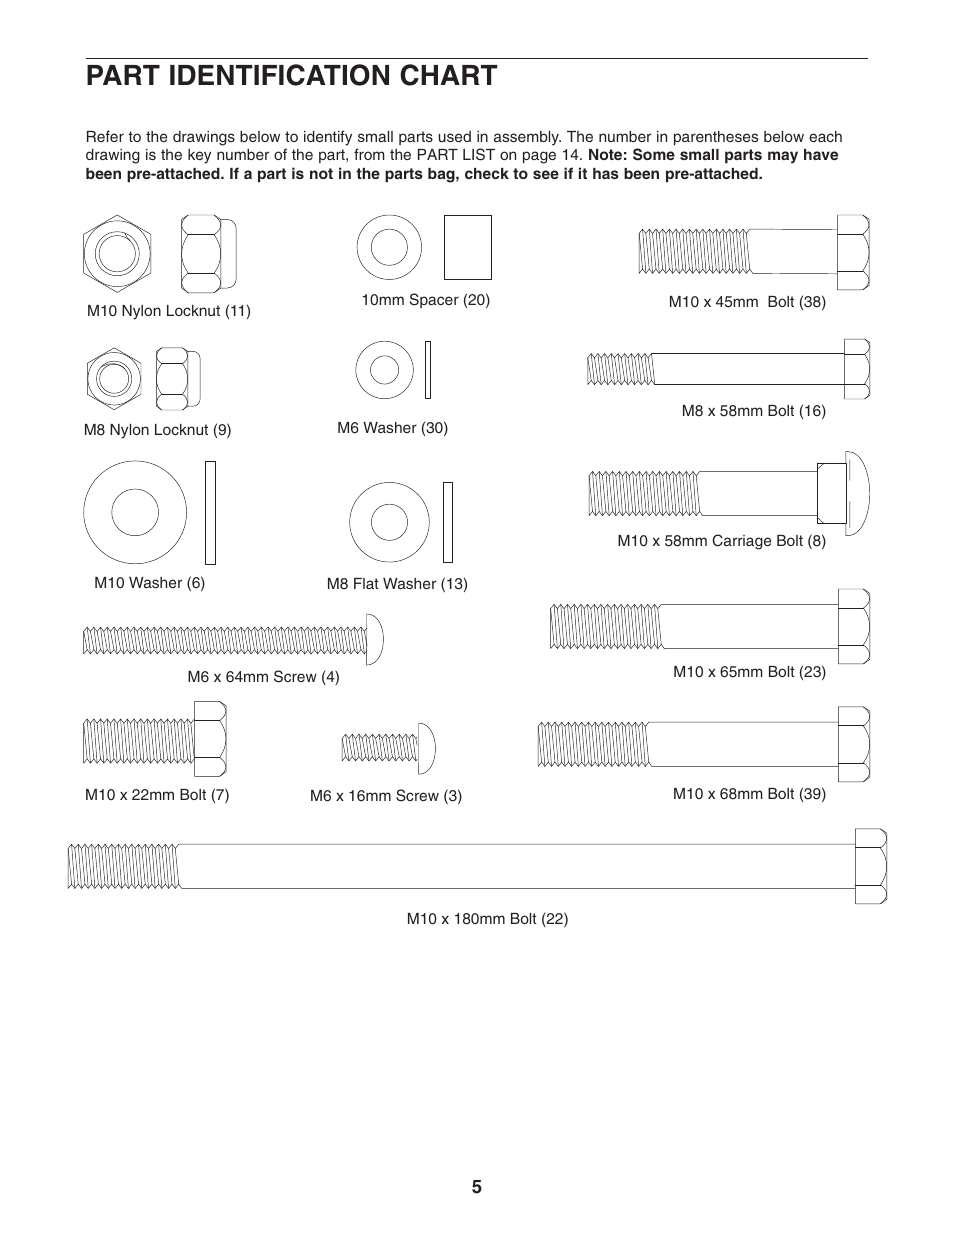 Part identification chart | Weider Pro XT20 WEBE09101 User Manual | Page 5 / 16